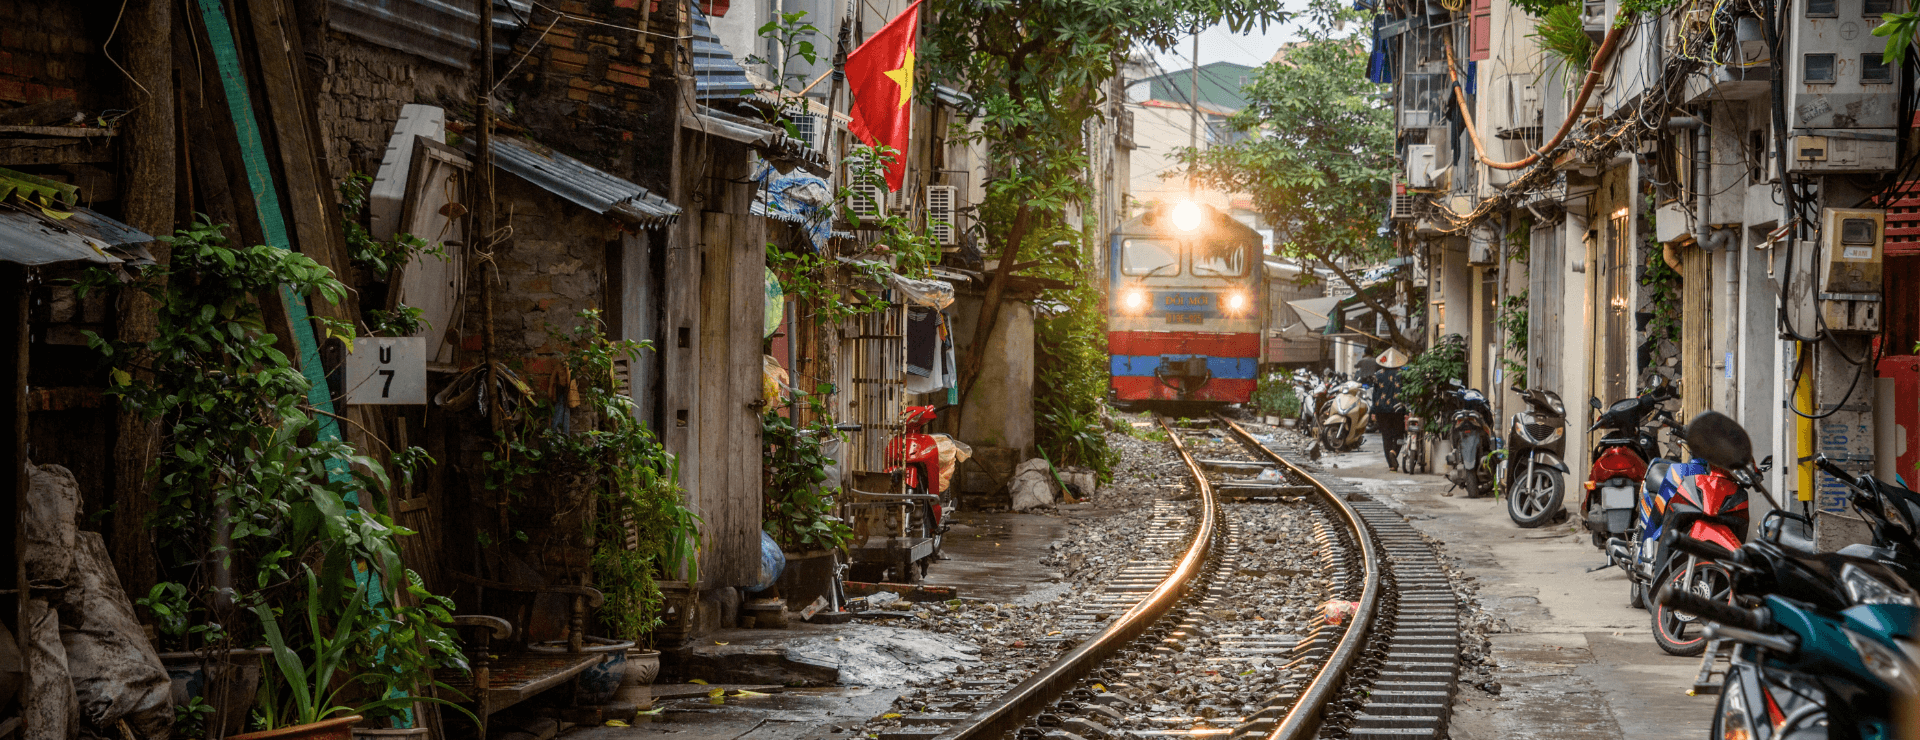 What To Do In Hanoi For 3 Days